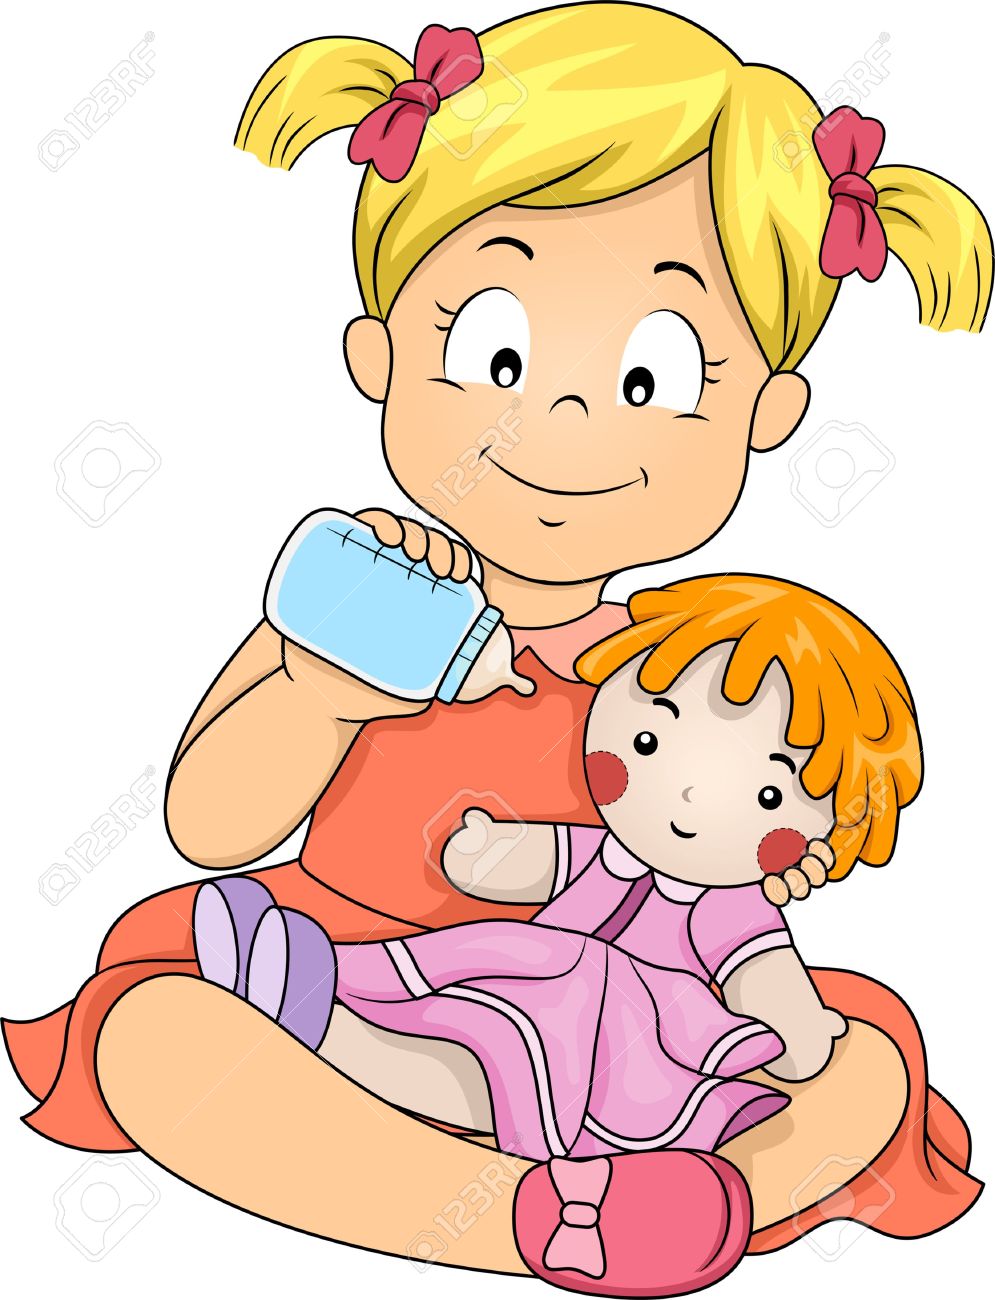 clipart picture of a doll - photo #46